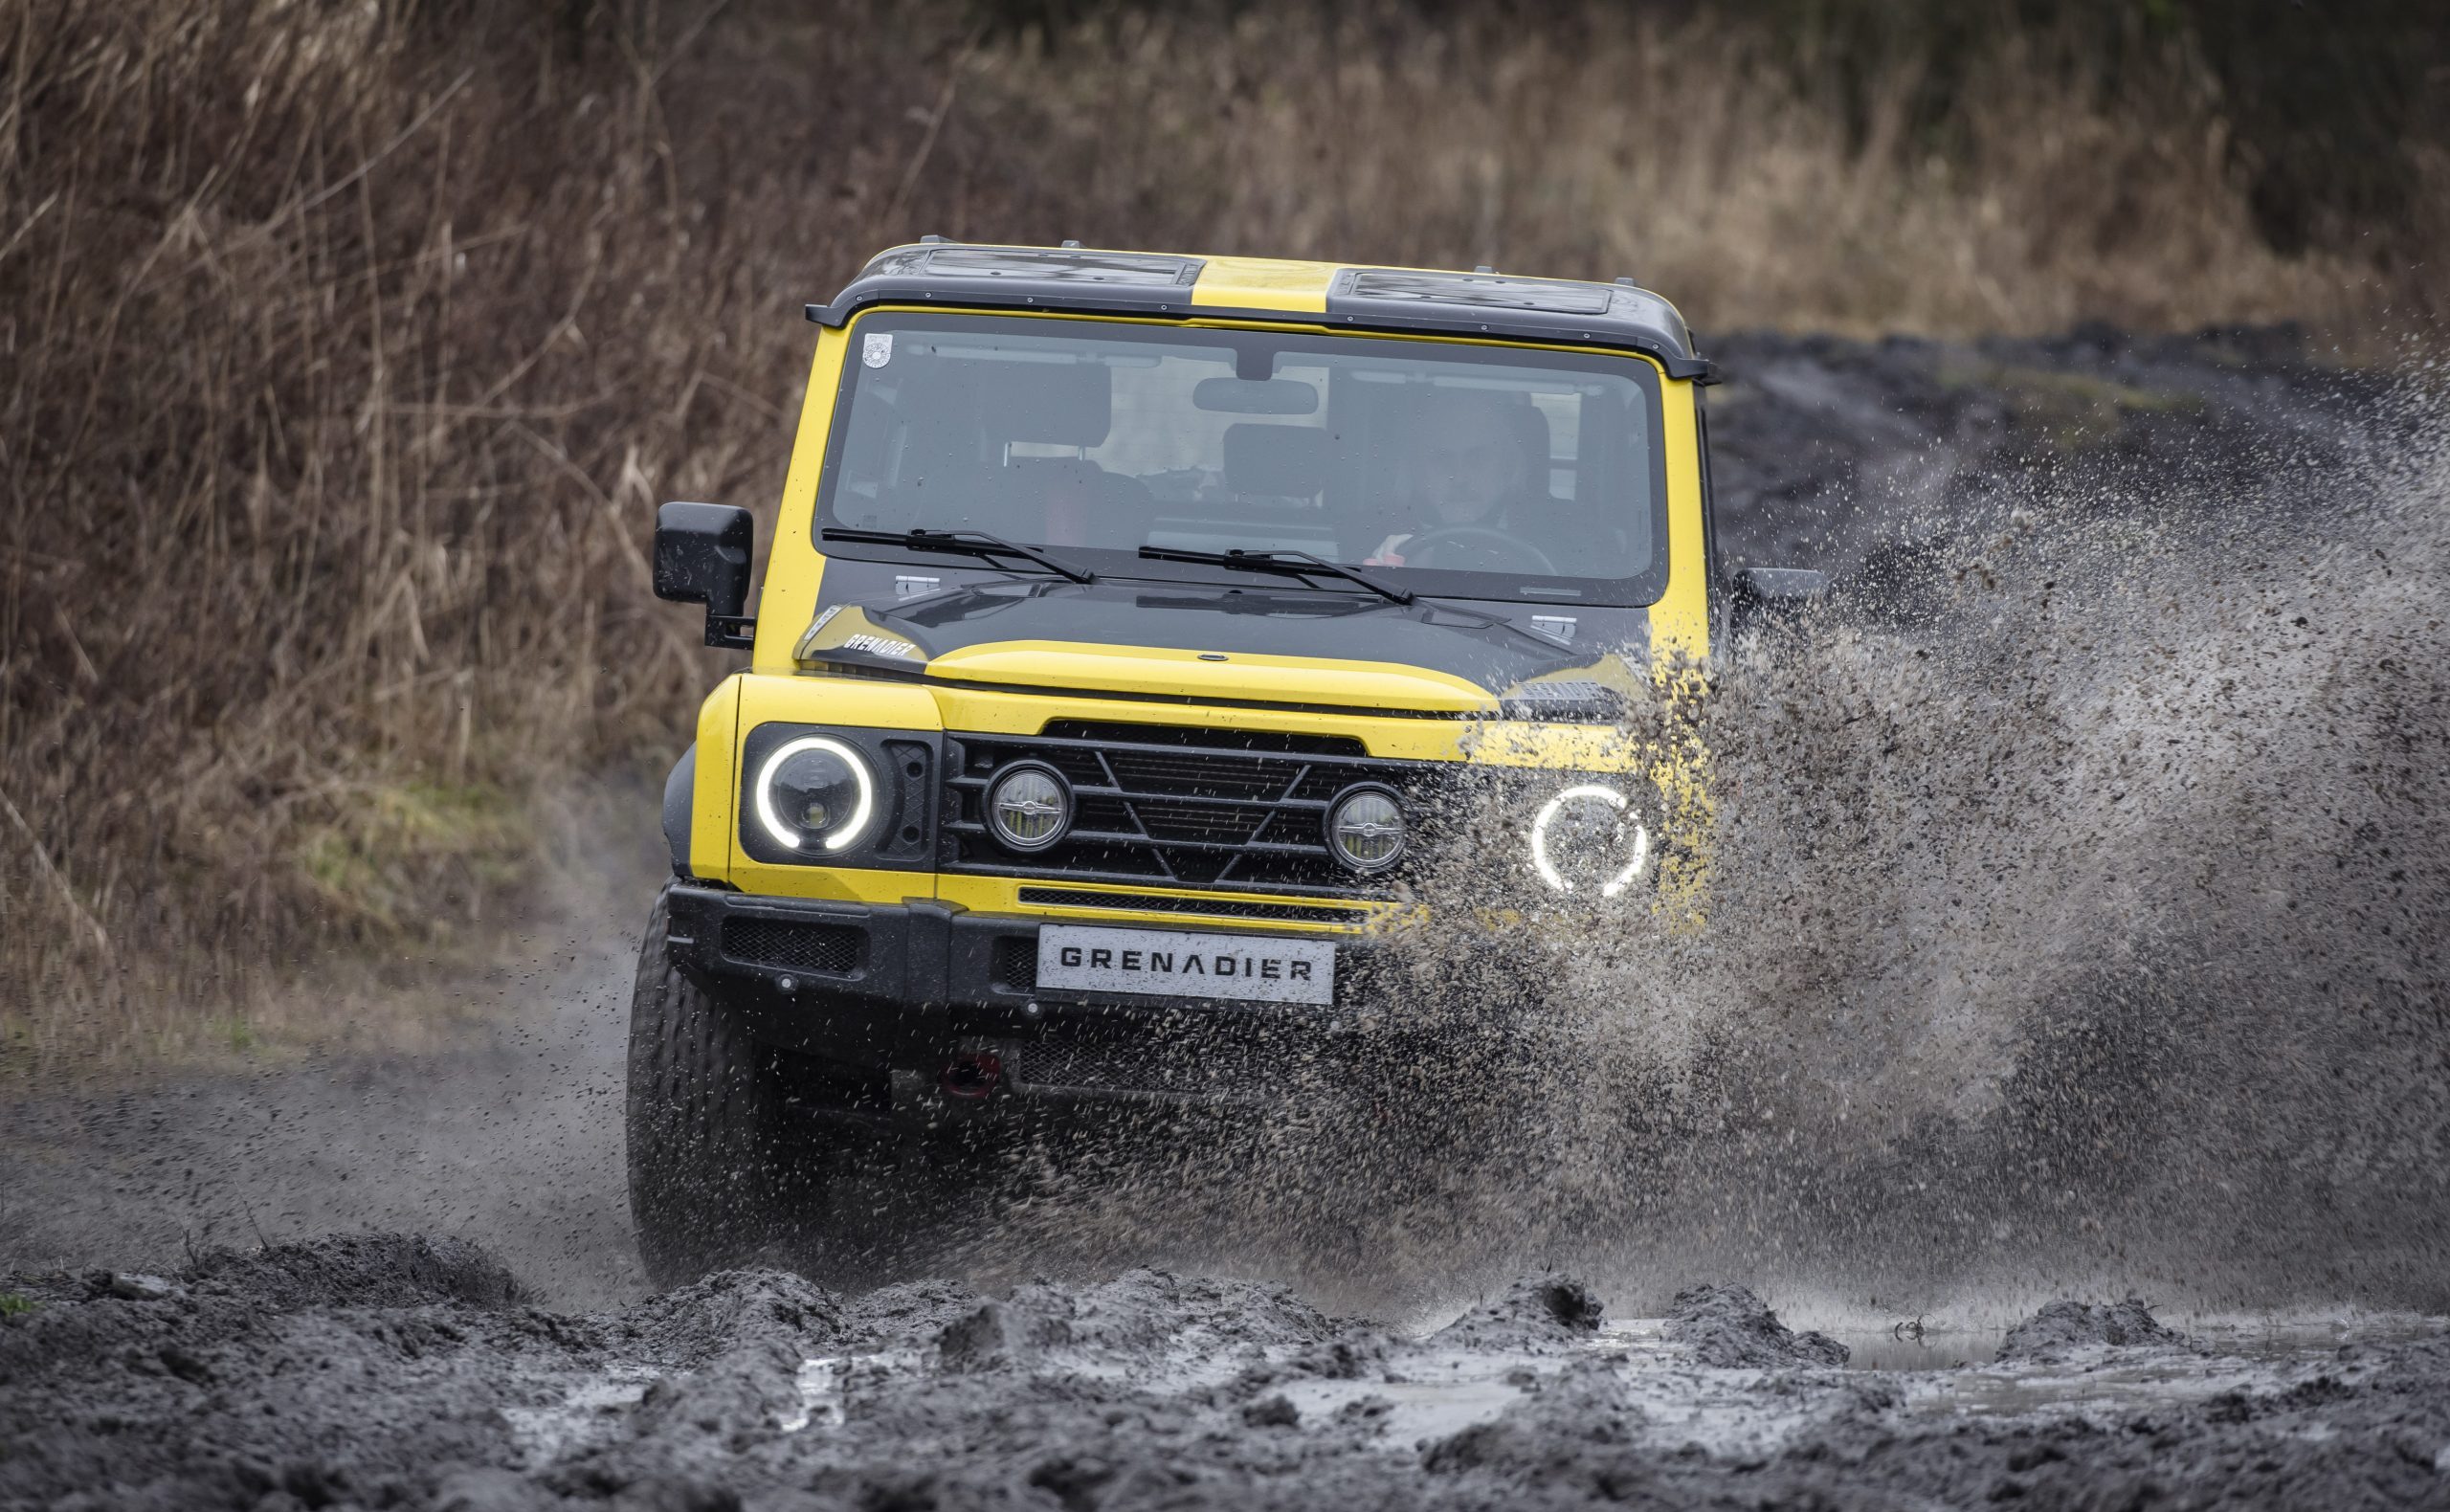 Ineos Grenadier review: Splashdown! The new 4x4 is made of tough stuff